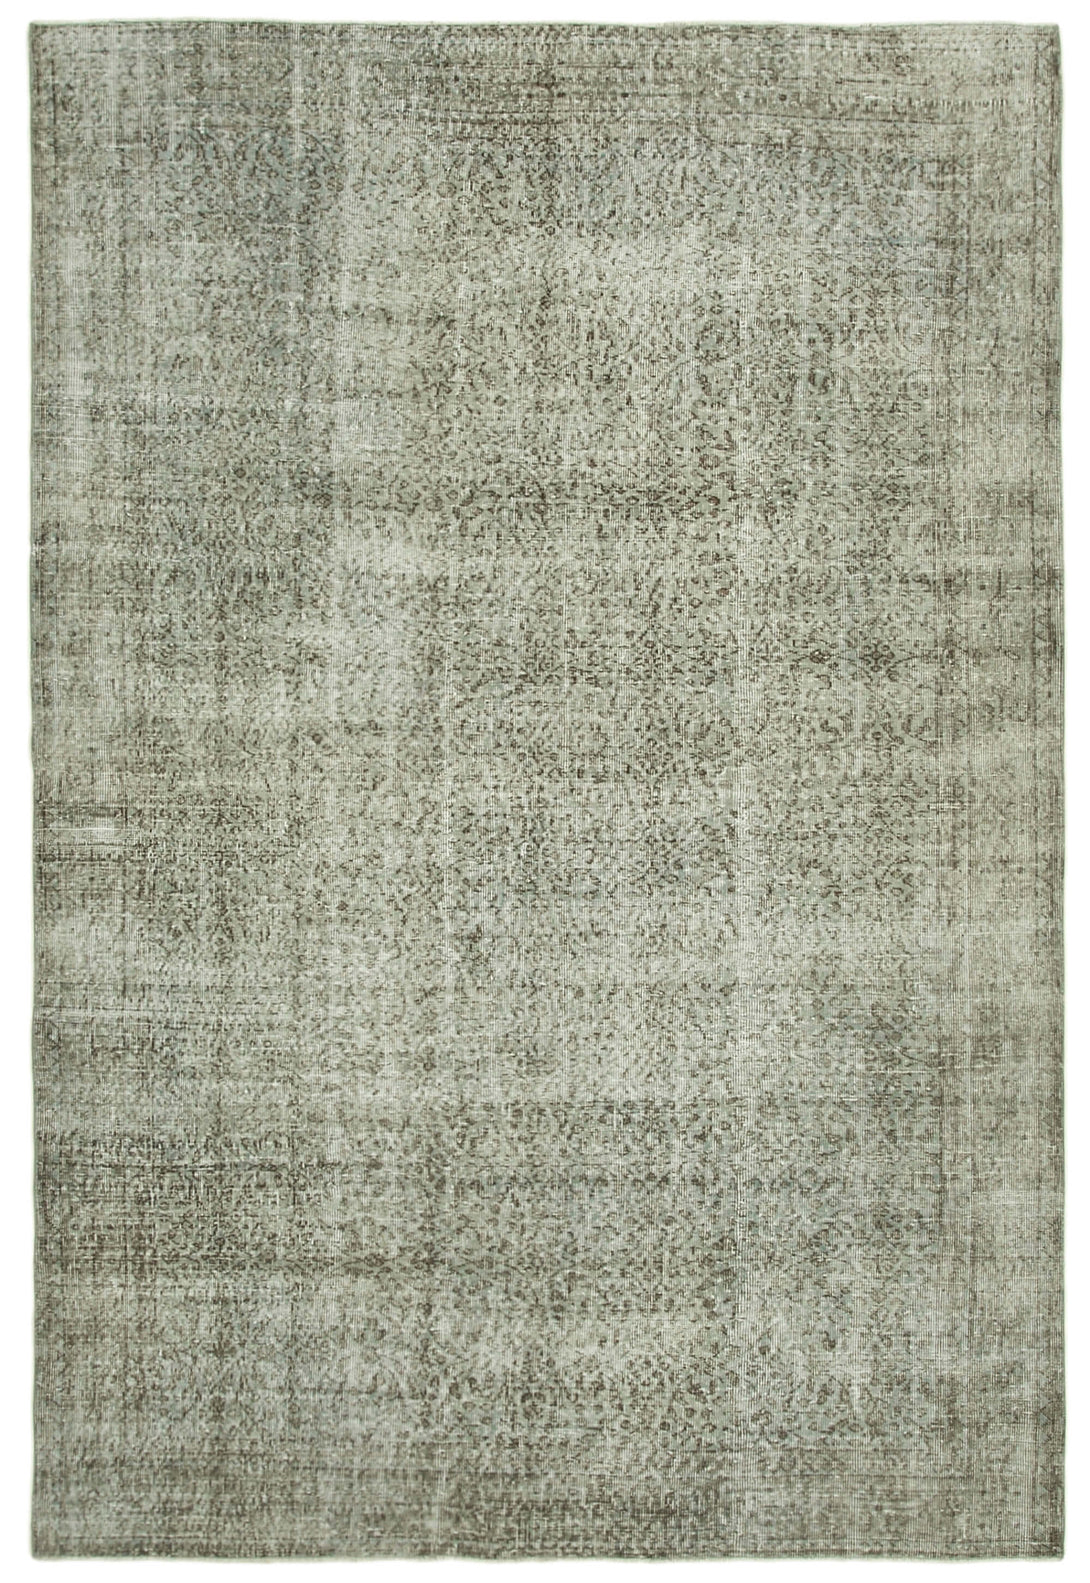 Handmade Overdyed Area Rug > Design# OL-AC-39424 > Size: 6'-9" x 9'-11", Carpet Culture Rugs, Handmade Rugs, NYC Rugs, New Rugs, Shop Rugs, Rug Store, Outlet Rugs, SoHo Rugs, Rugs in USA